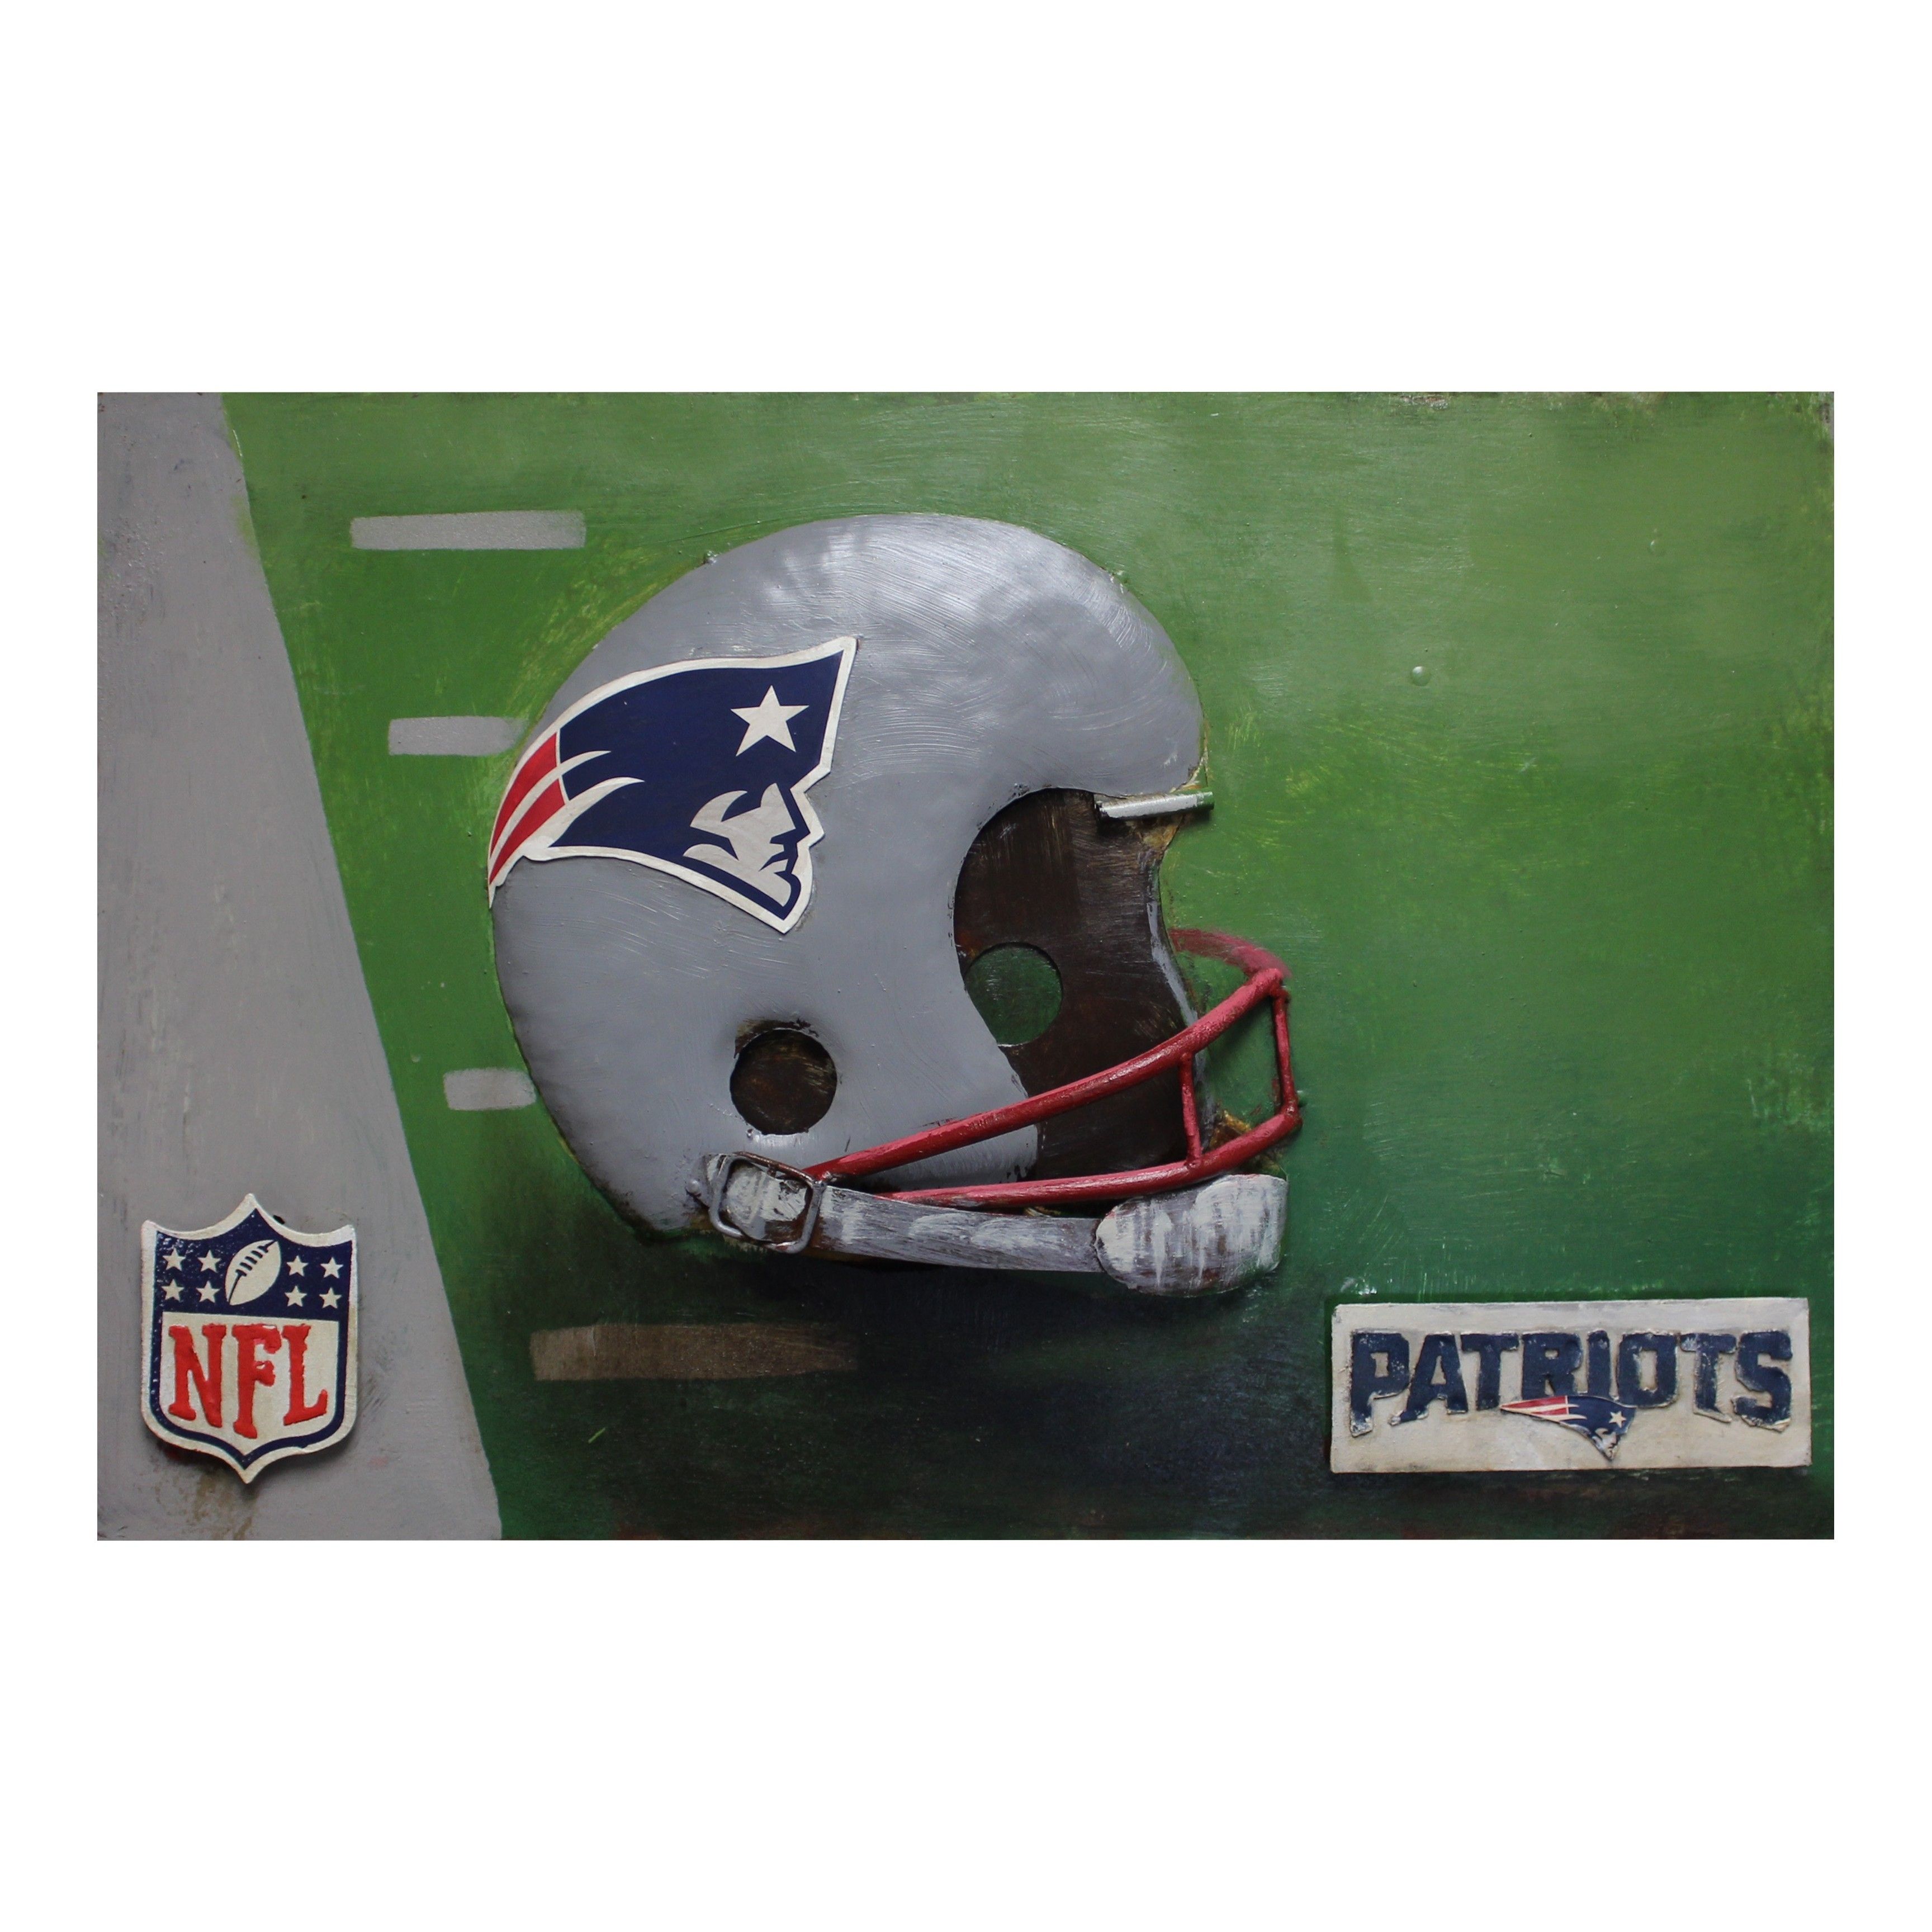 Nfl New England Patriots Metal Wall Art @ Loria Awards For Nfl Wall Art (View 5 of 20)